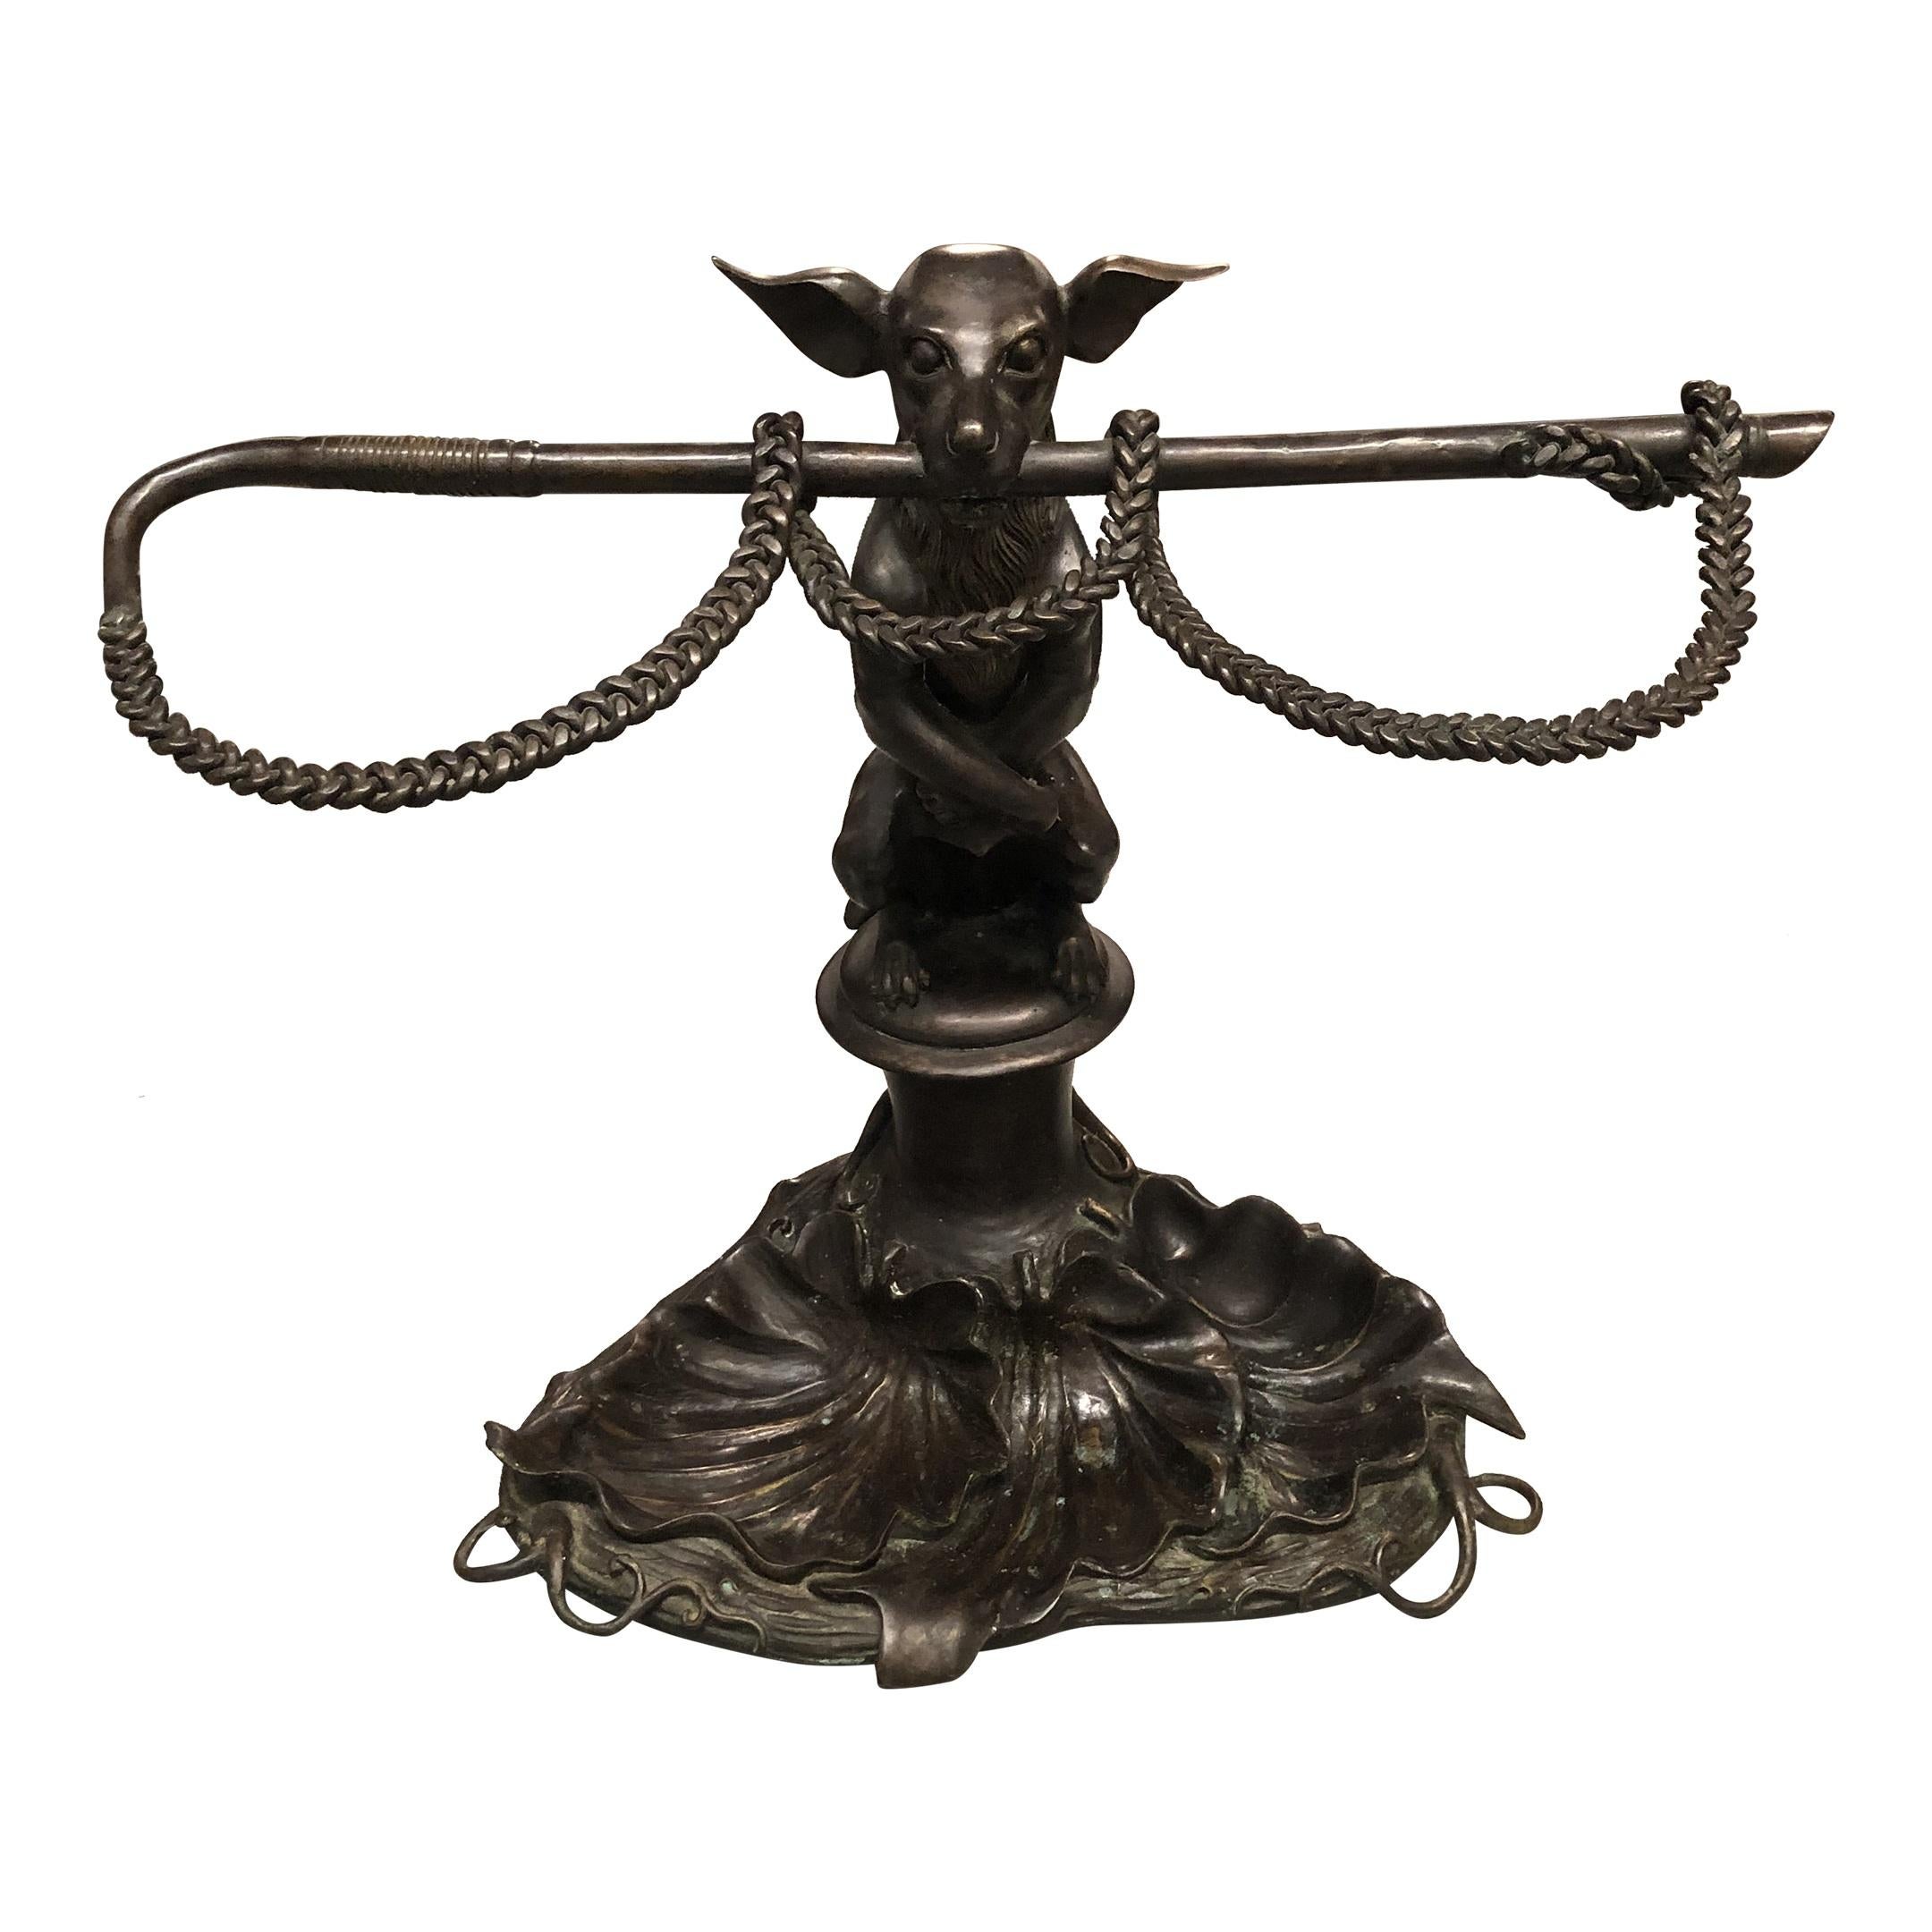 English, 20th century. 
A vintage bronze dog form umbrella stand or cane holder with lily pad base after the original by Coalbrookdale. 
Approx: 20